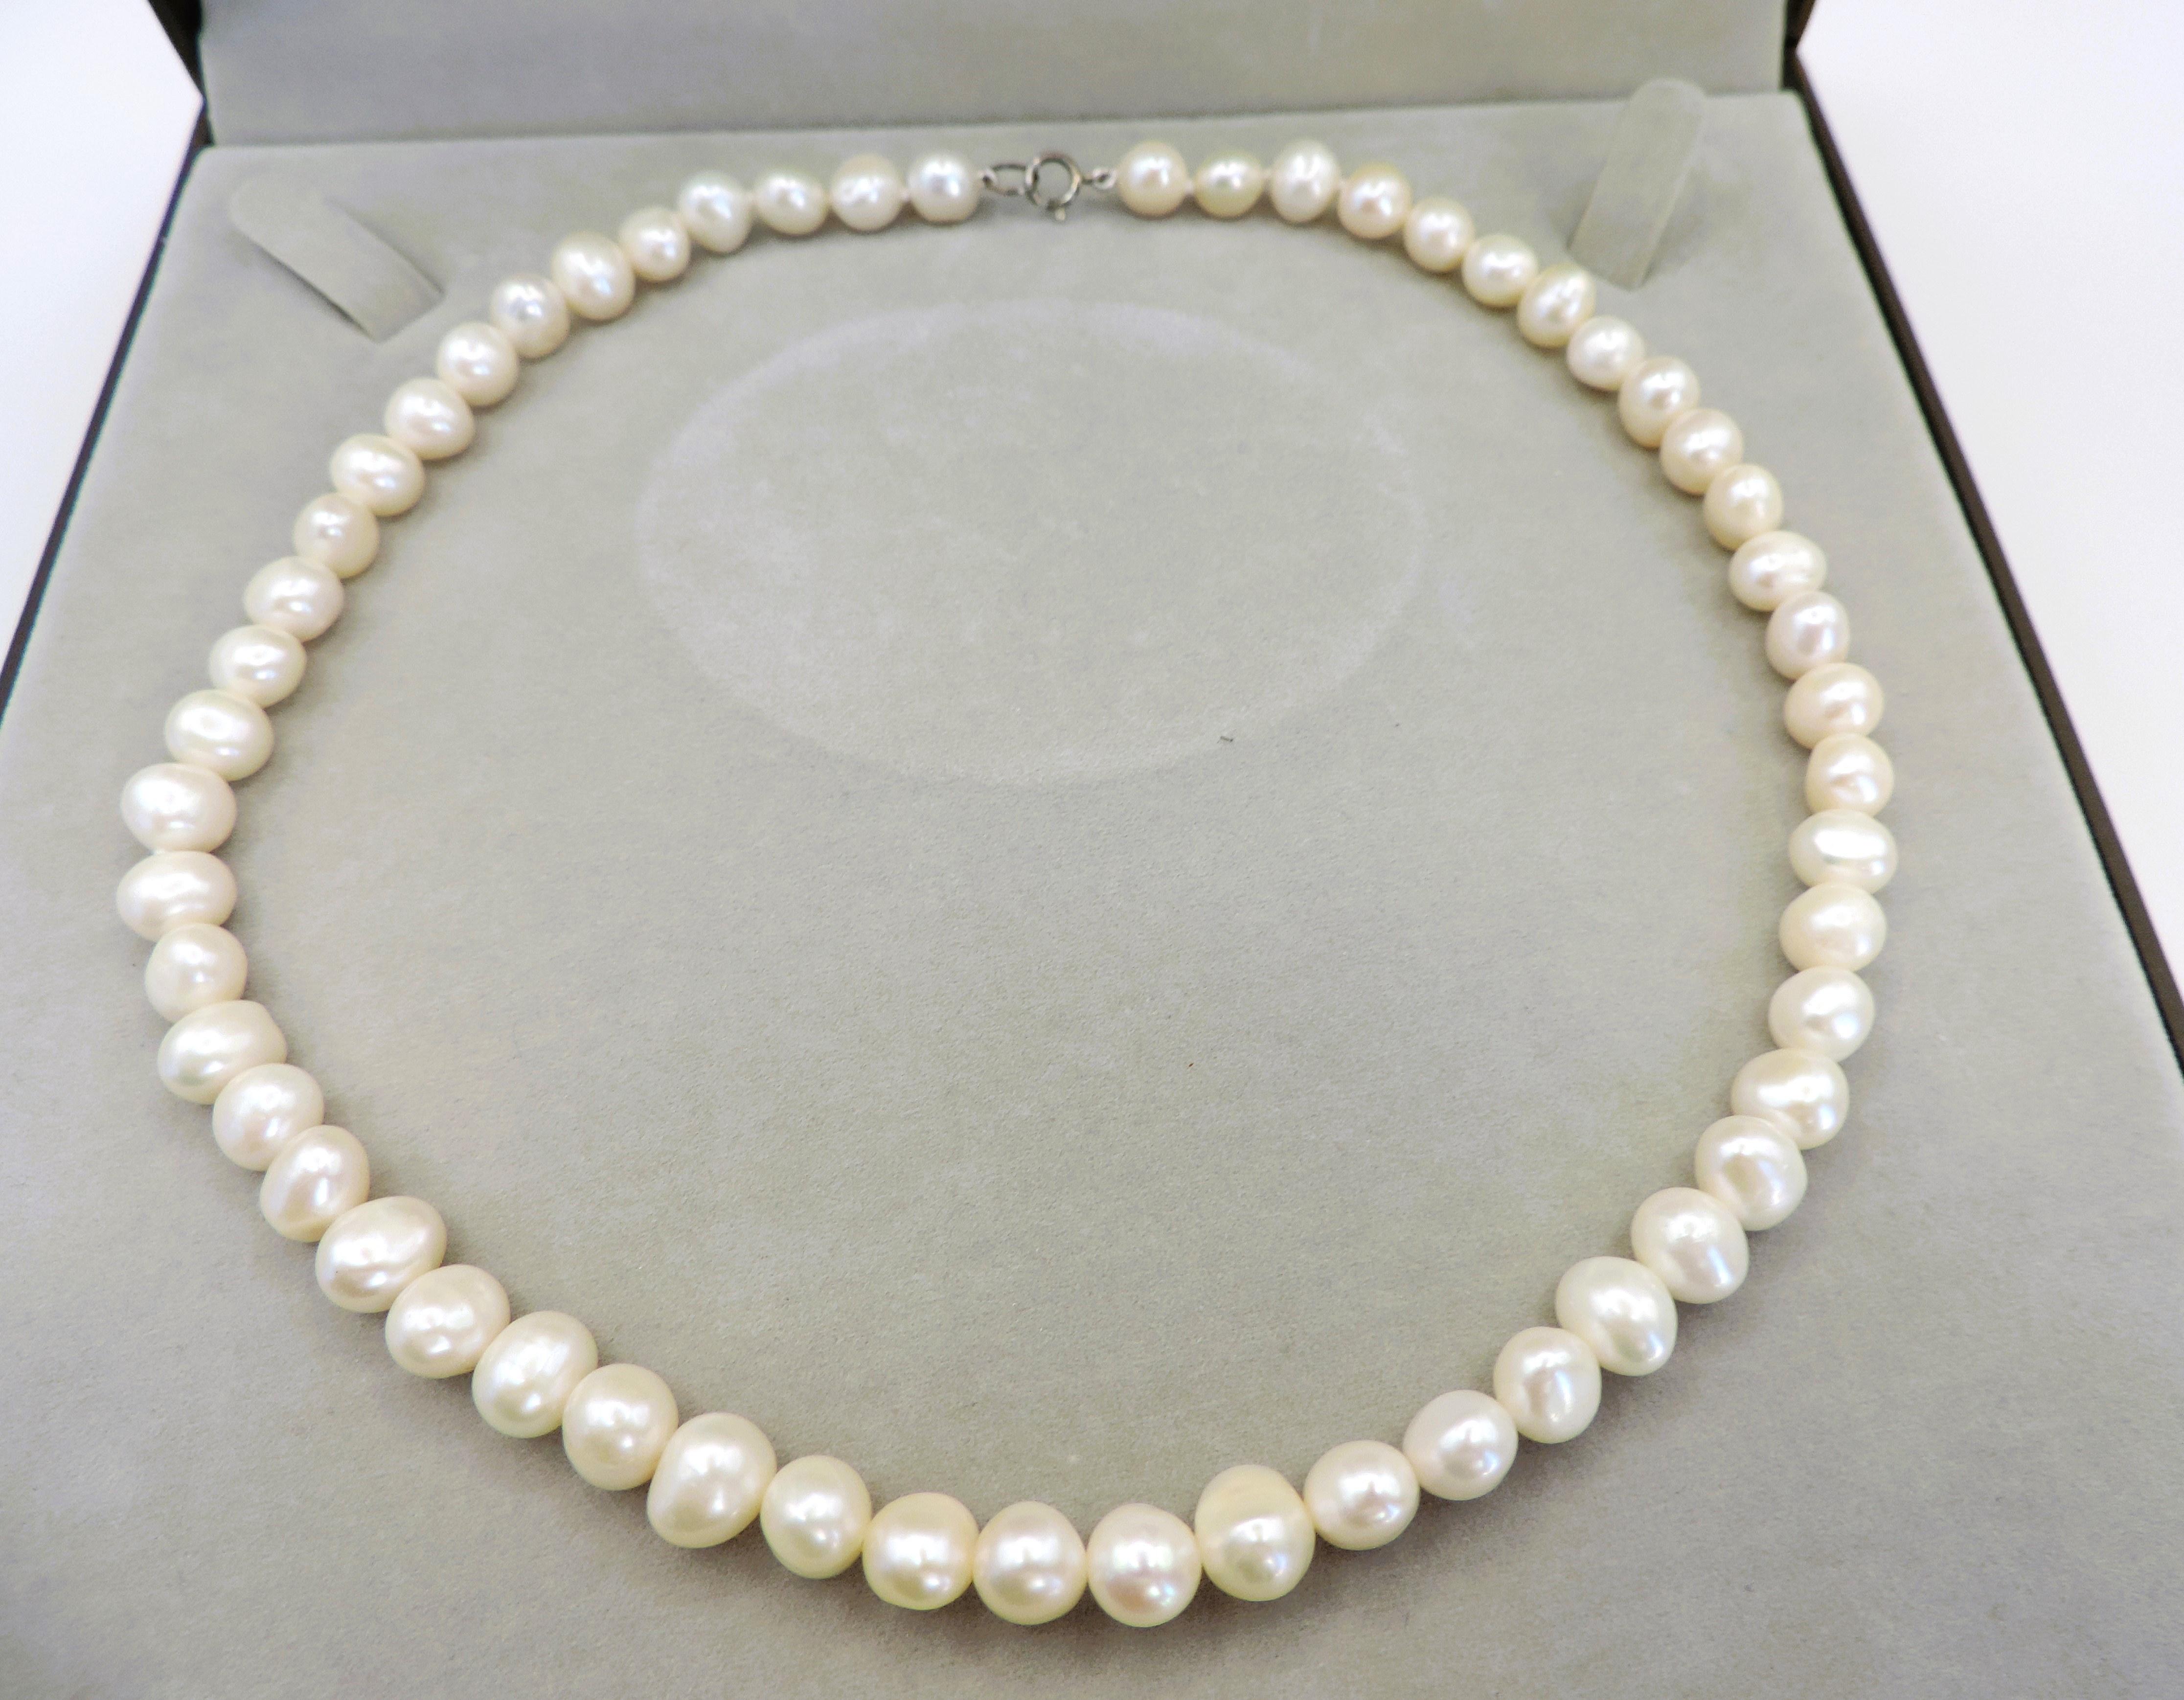 Cultured Pearl Necklace Silver Clasp New With Gift Box - Image 2 of 4